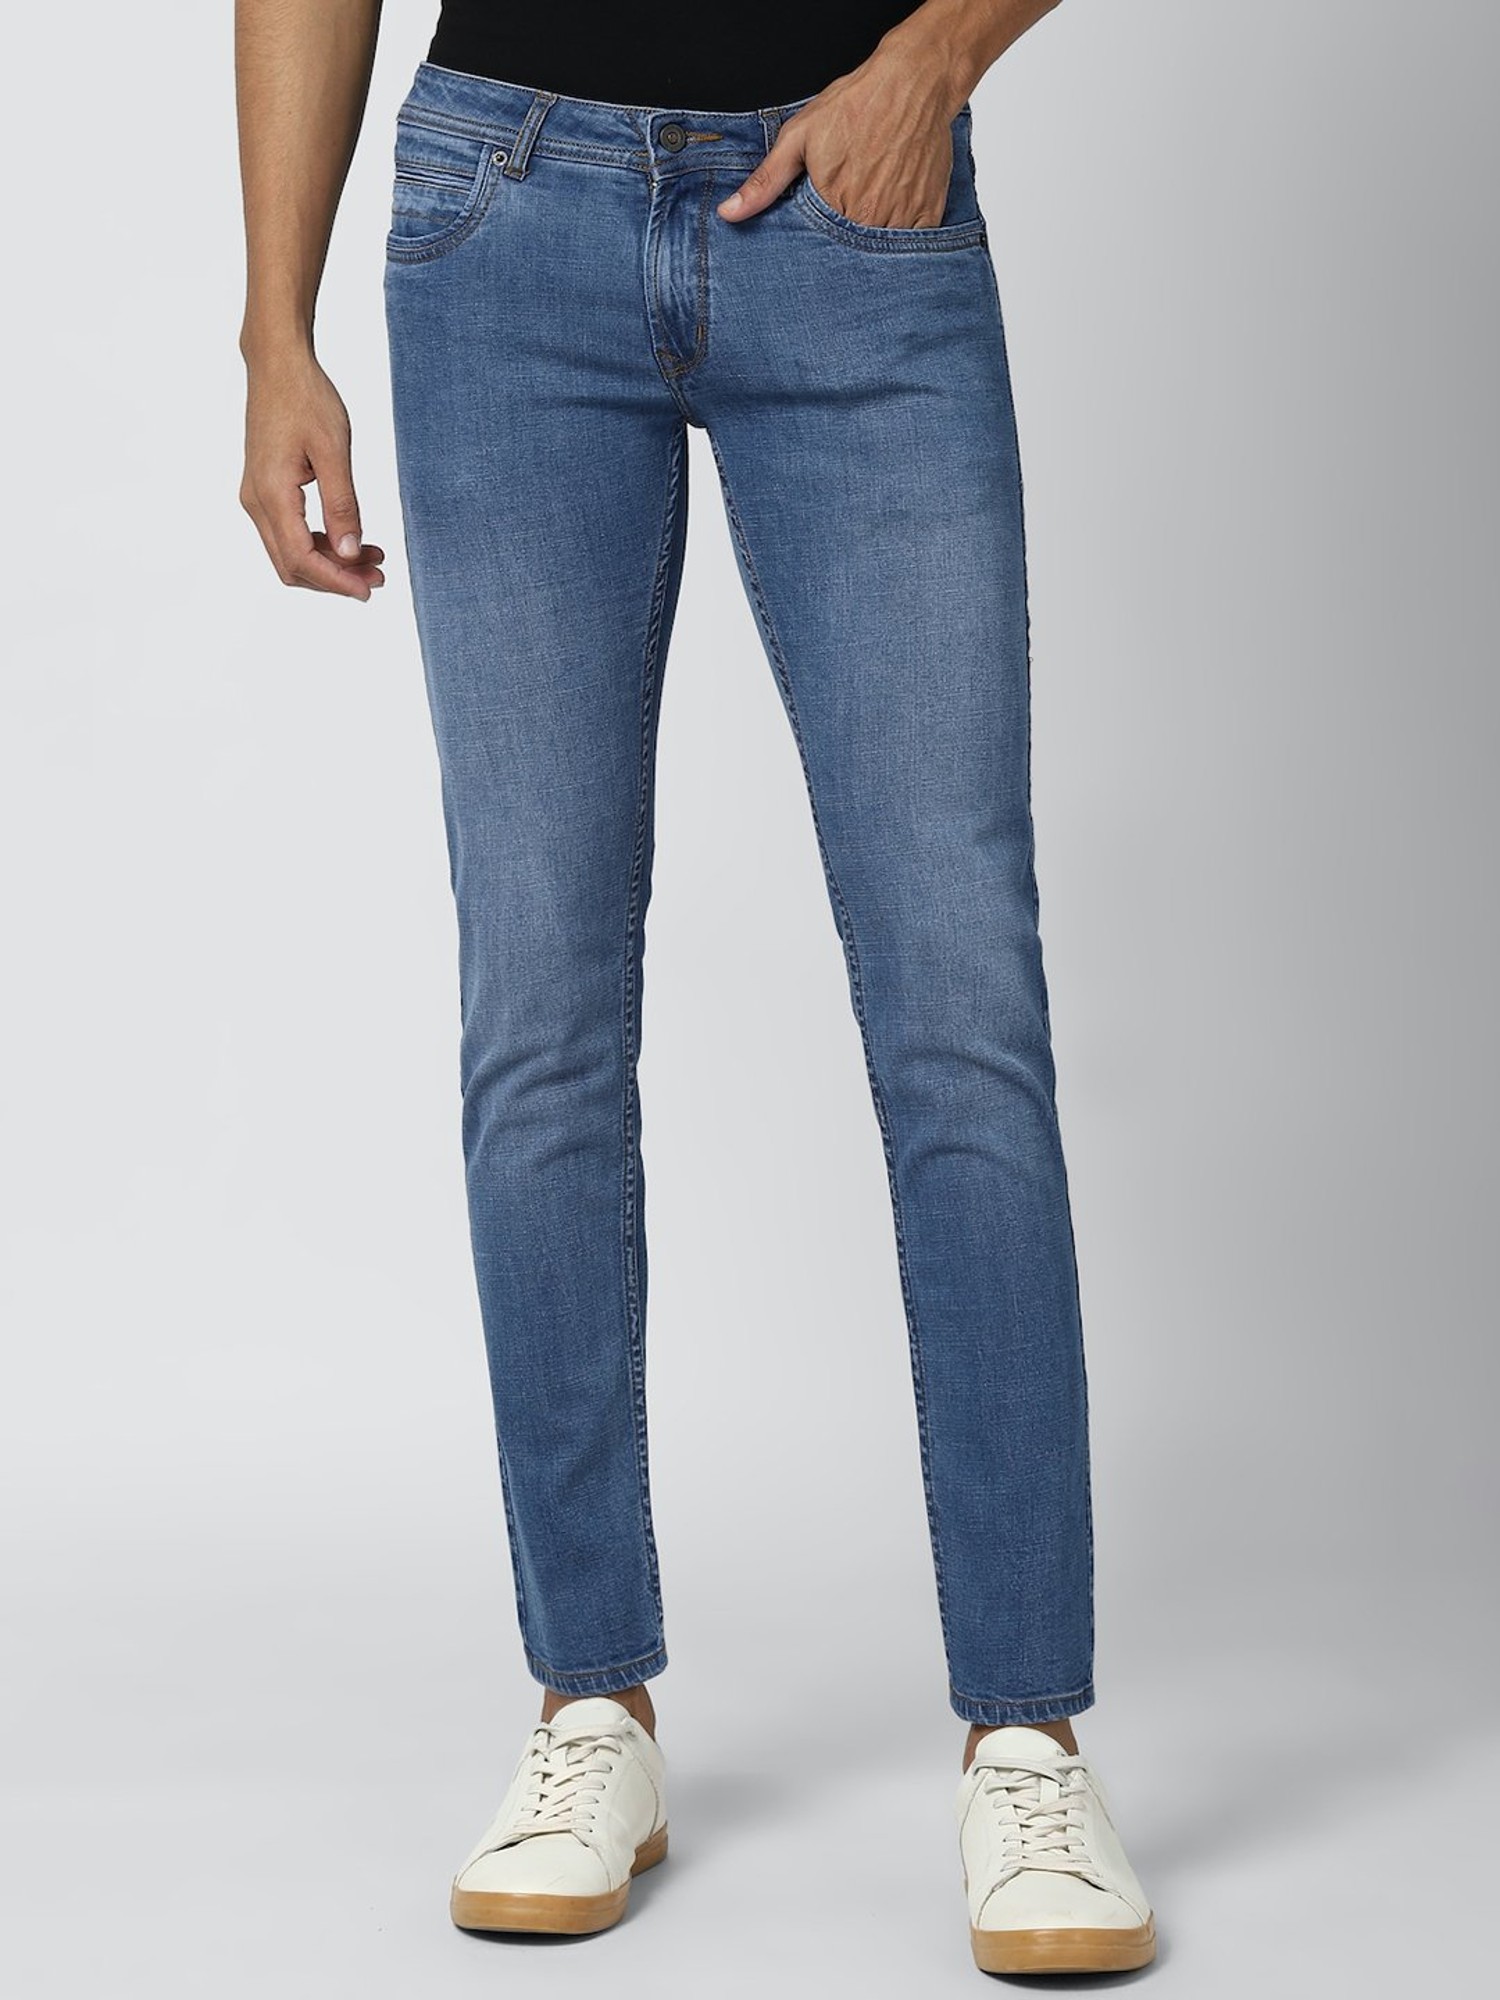 Buy Peter England Jeans Blue Skinny Fit Jeans for Mens Online @ Tata CLiQ